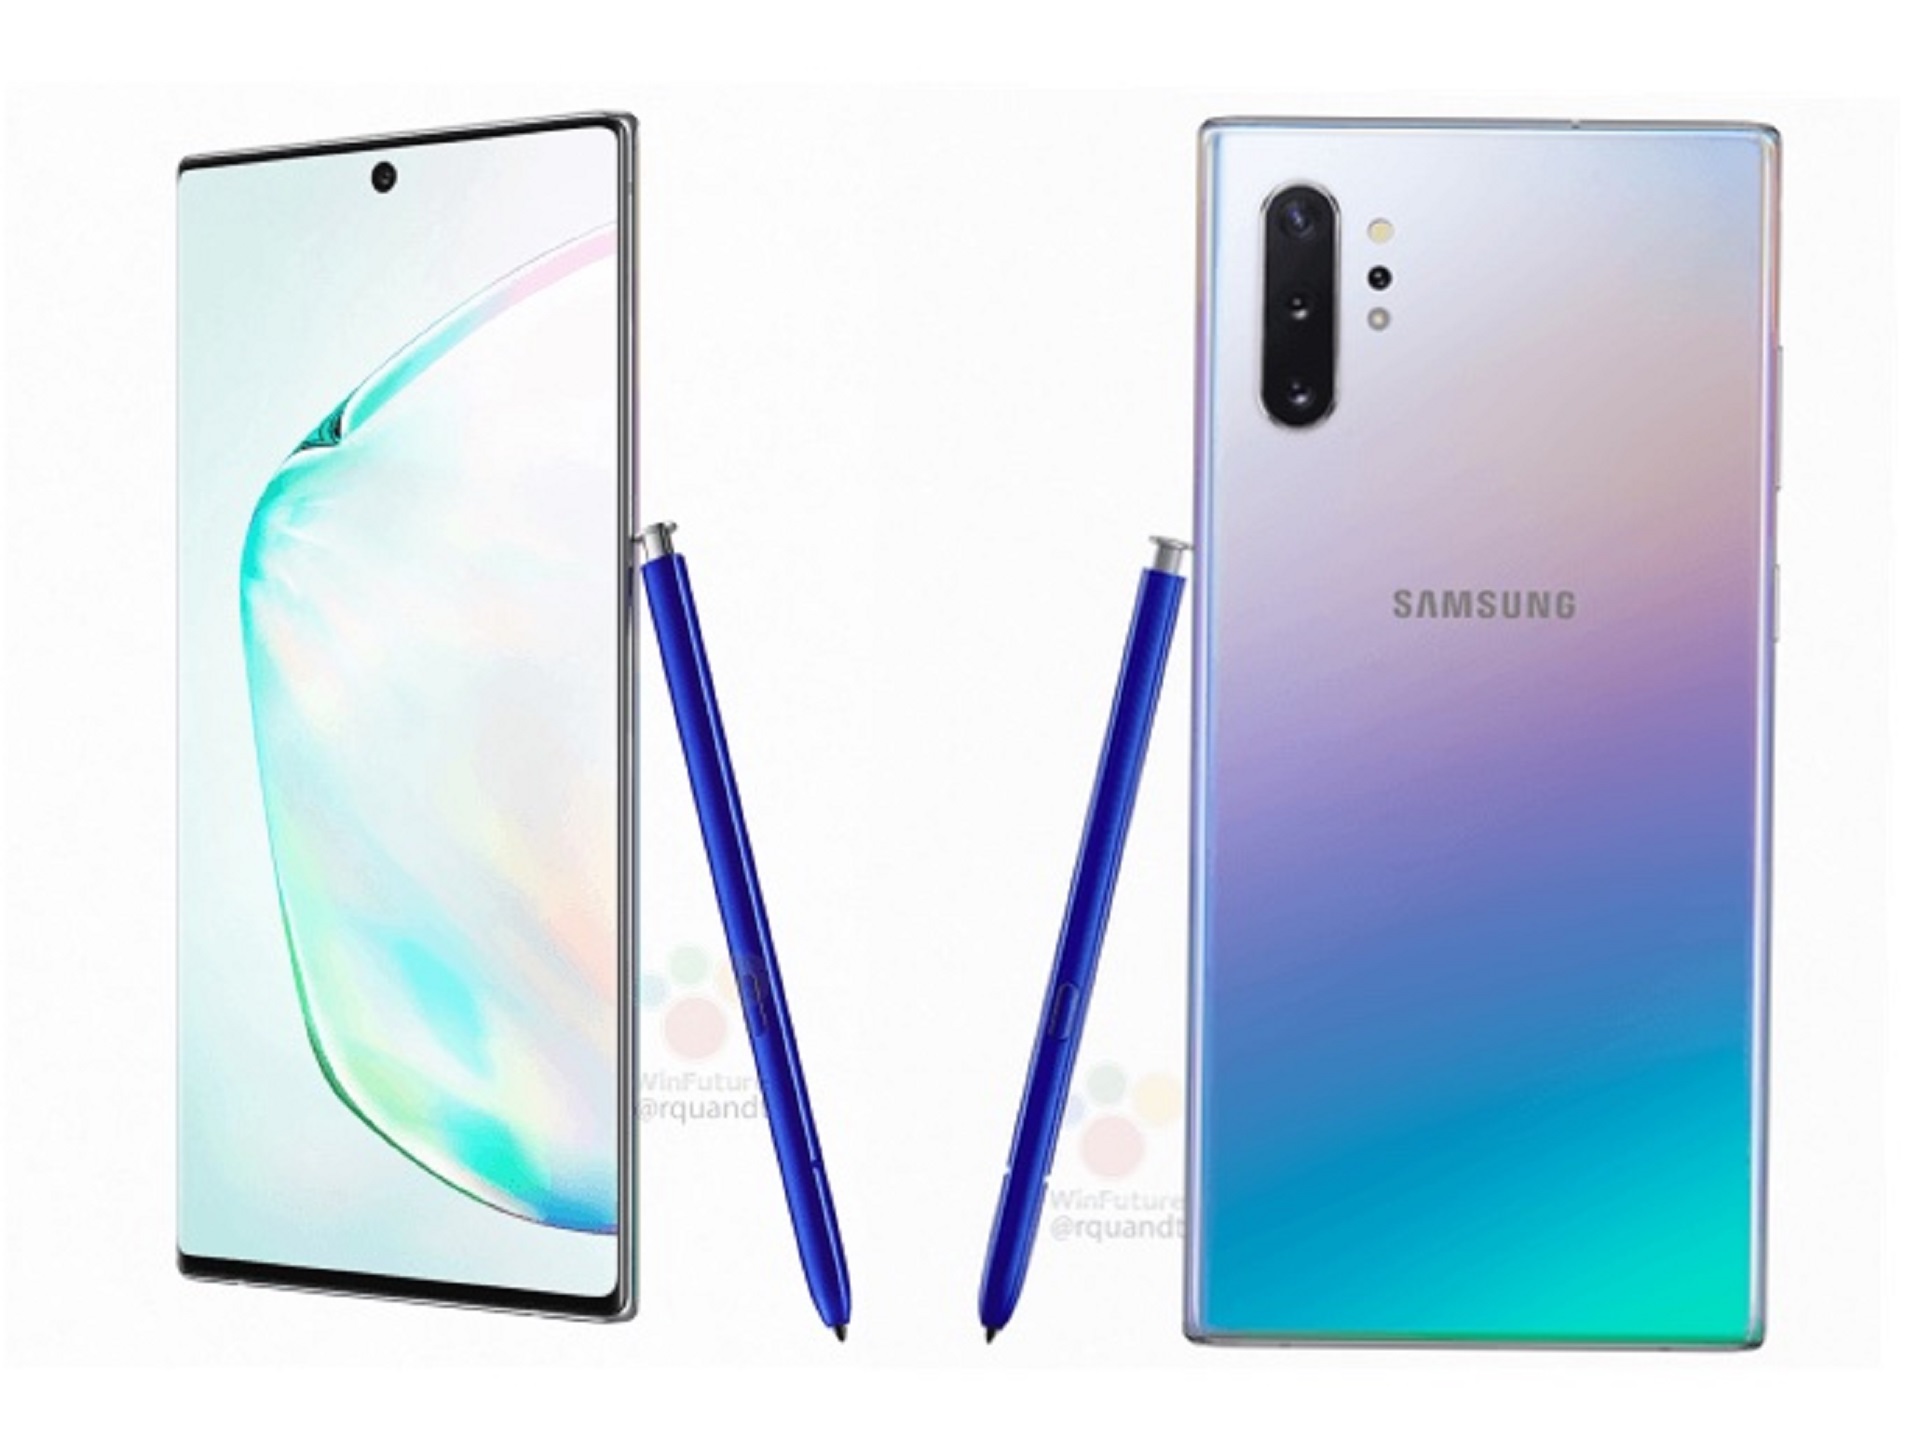 Самсунг галакси нот лайт. Самсунг галакси ноут 10 плюс. Galaxy Note 10 Plus. Samsung Note 10. Samsung Galaxy Note 10 Lite.